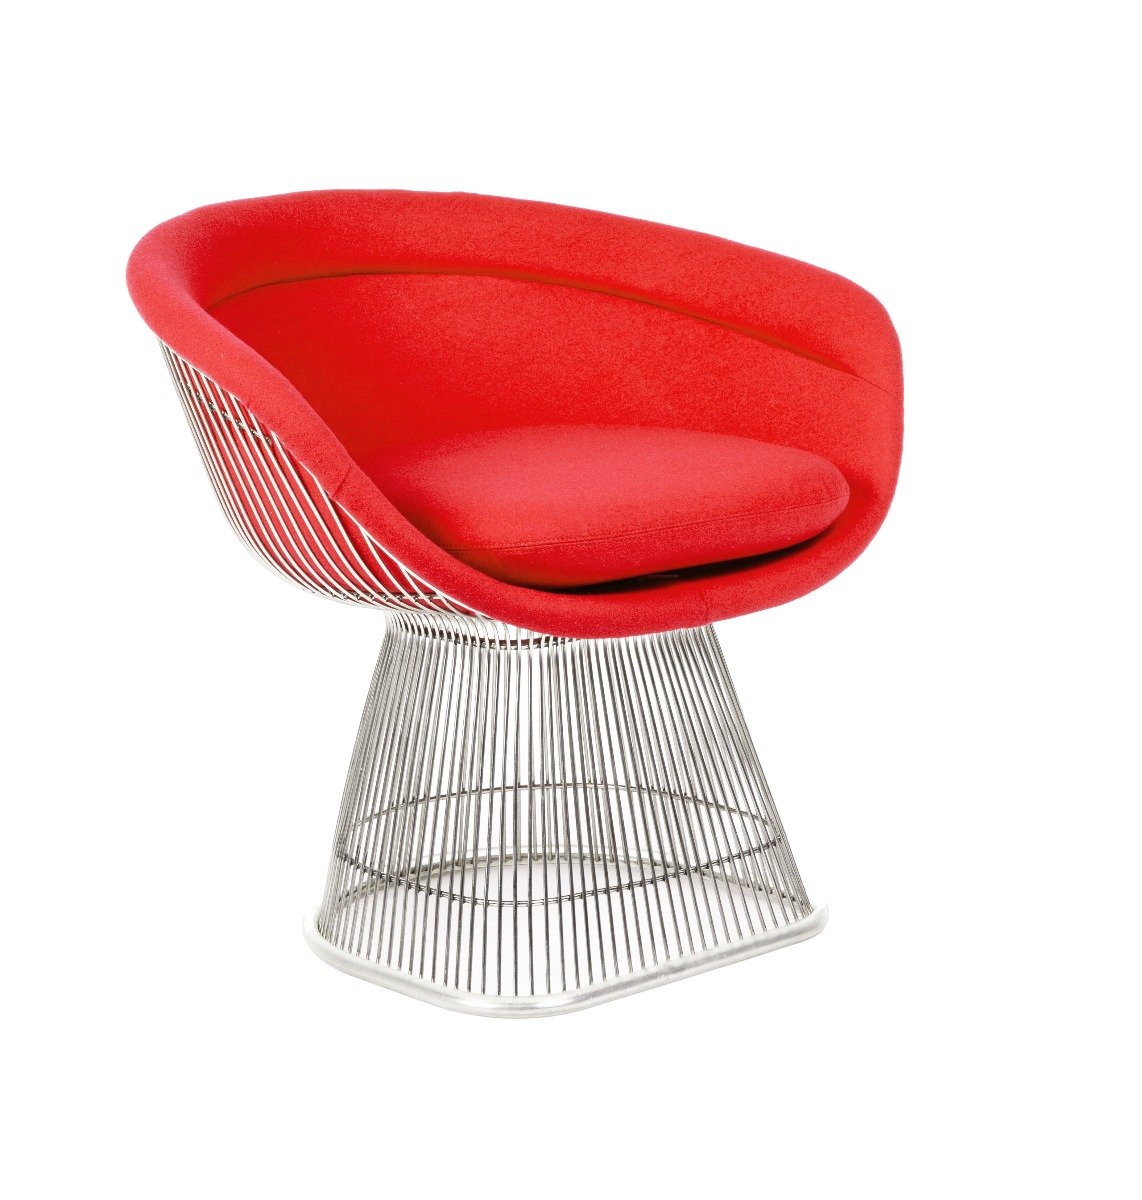 Warrens | Platner Lounge Chair Furniture-Living Room-Lounge Chairs